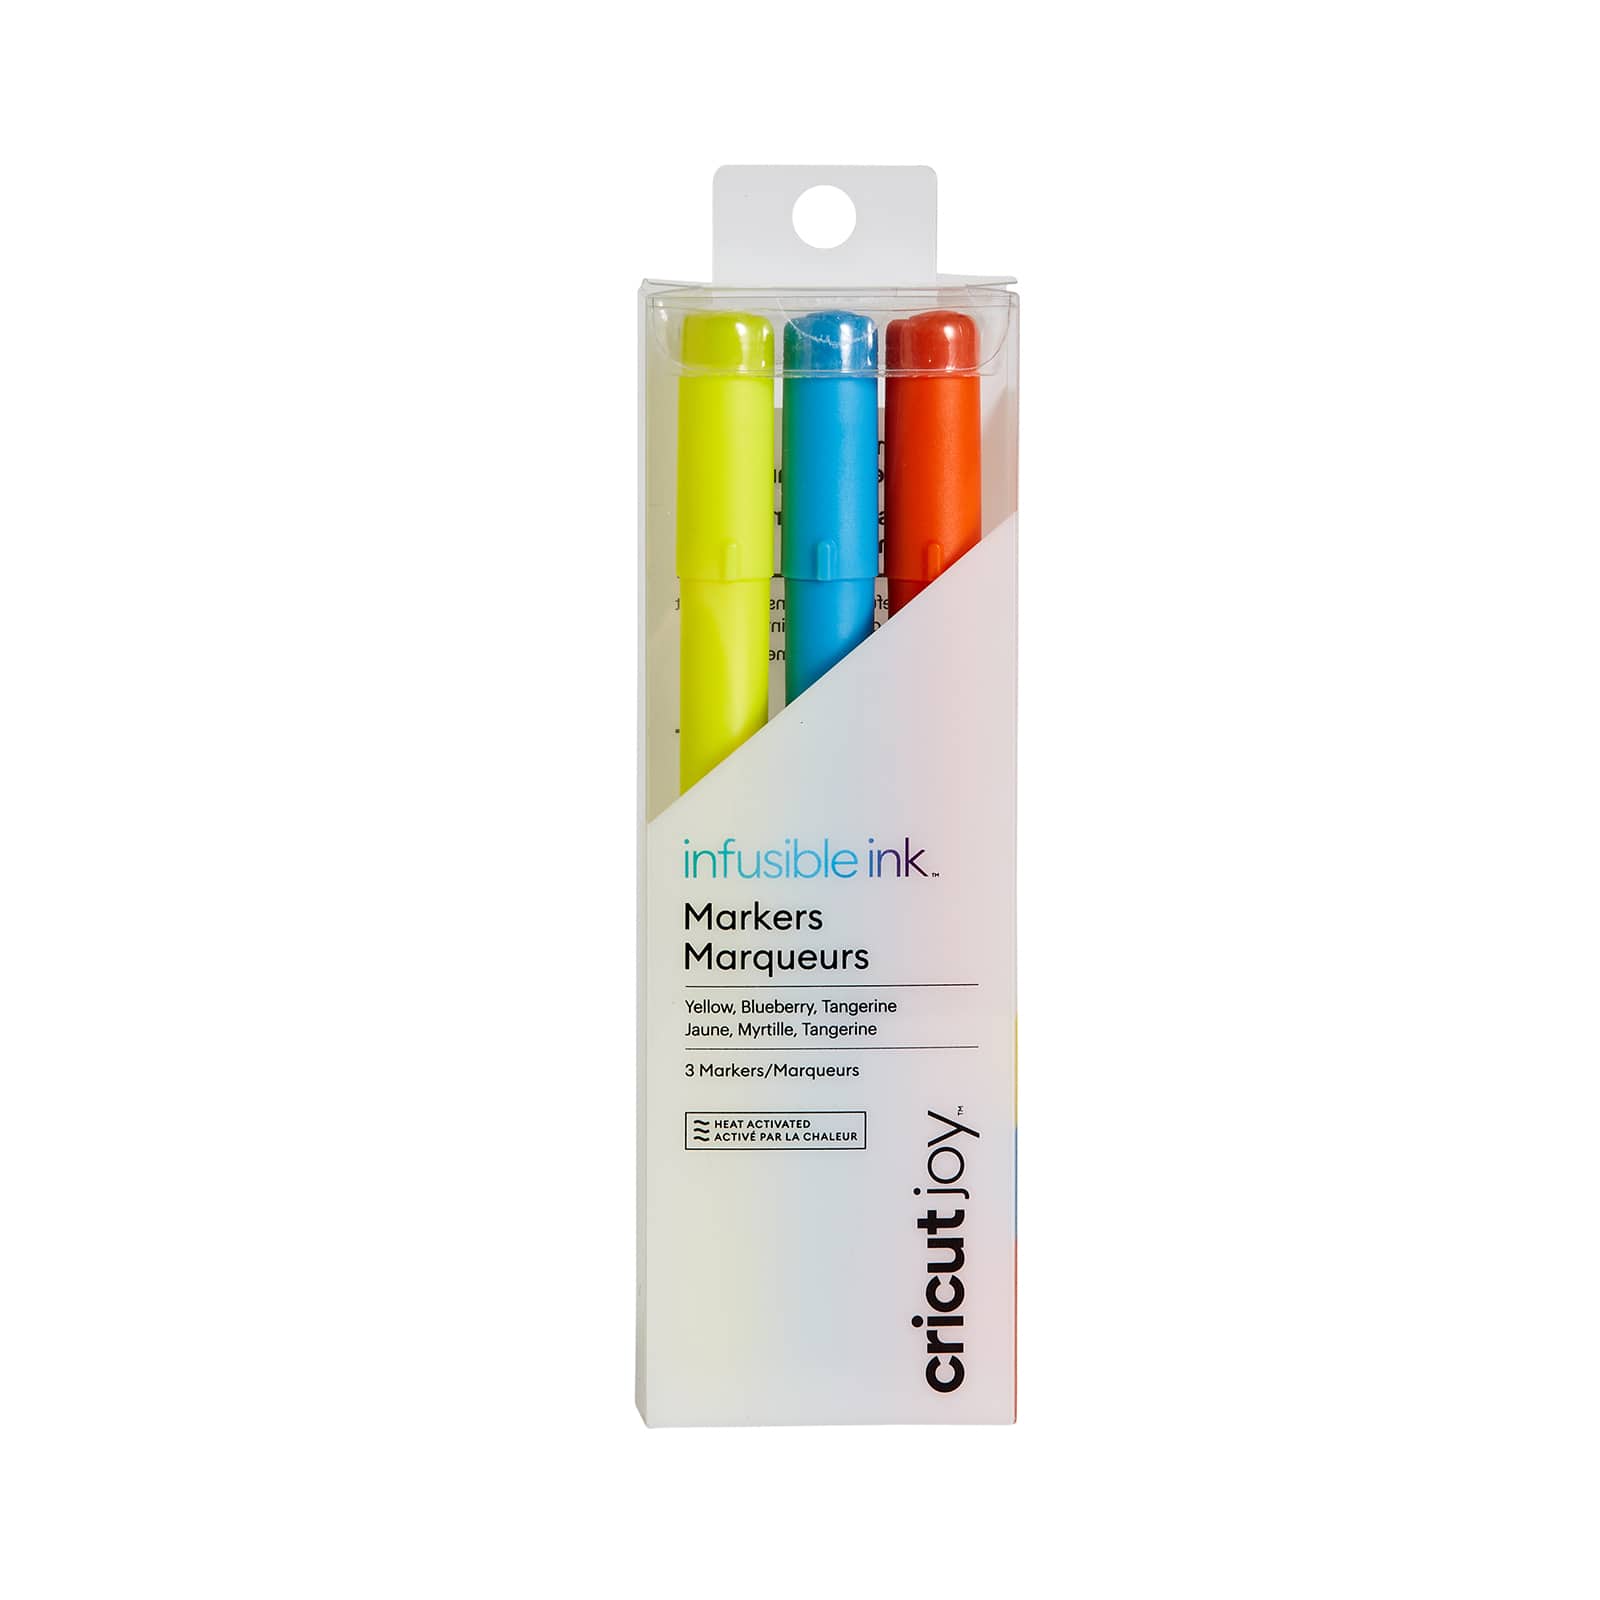 Craft Express 6 Pack Fluorescent Joy Sublimation Markers